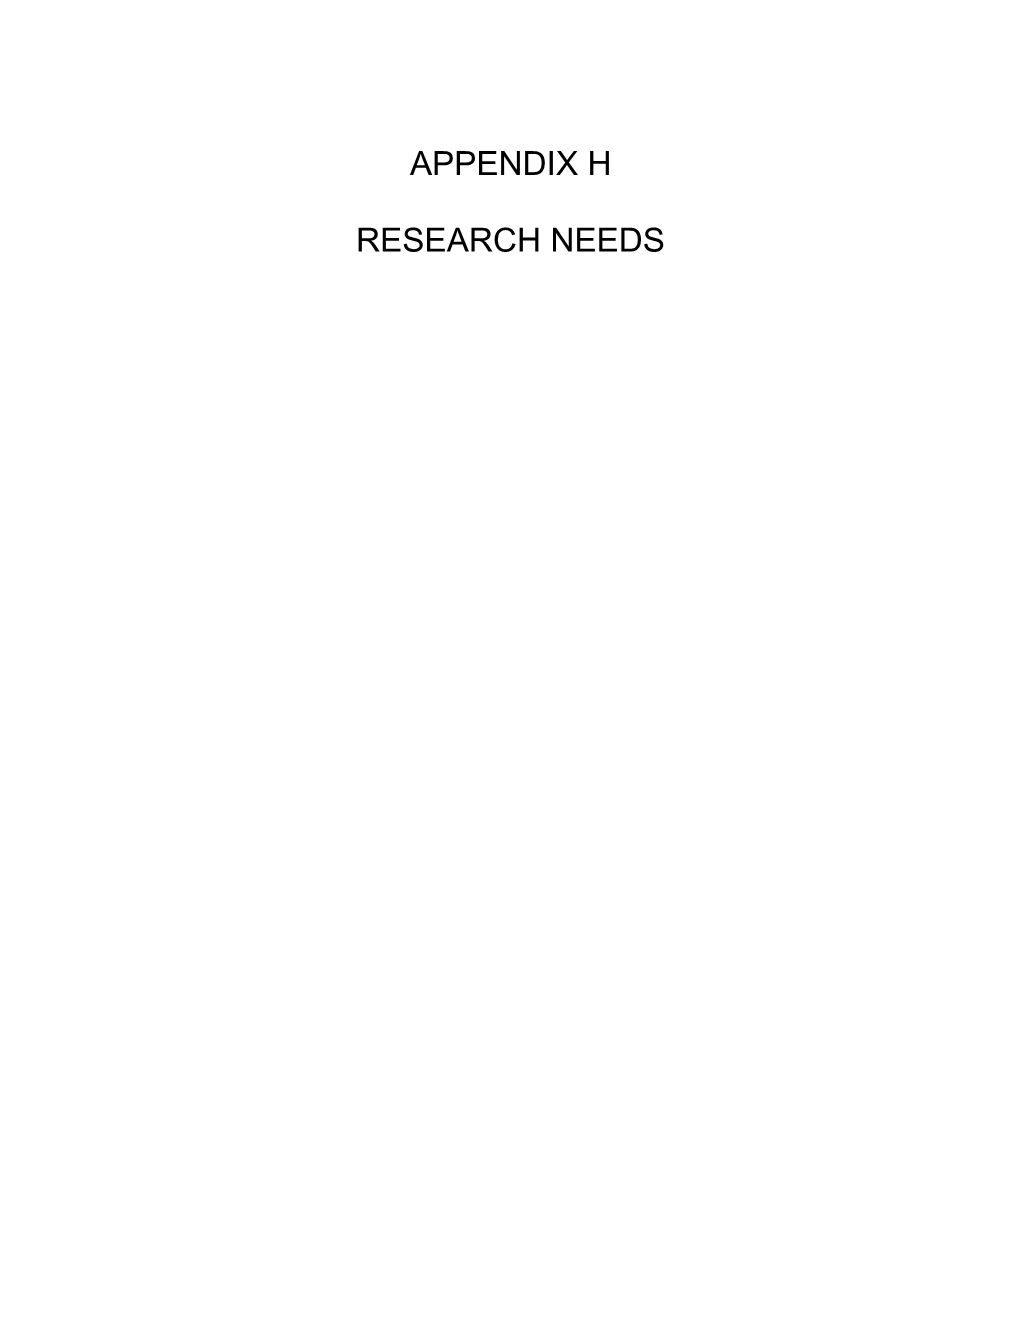 Research Needs